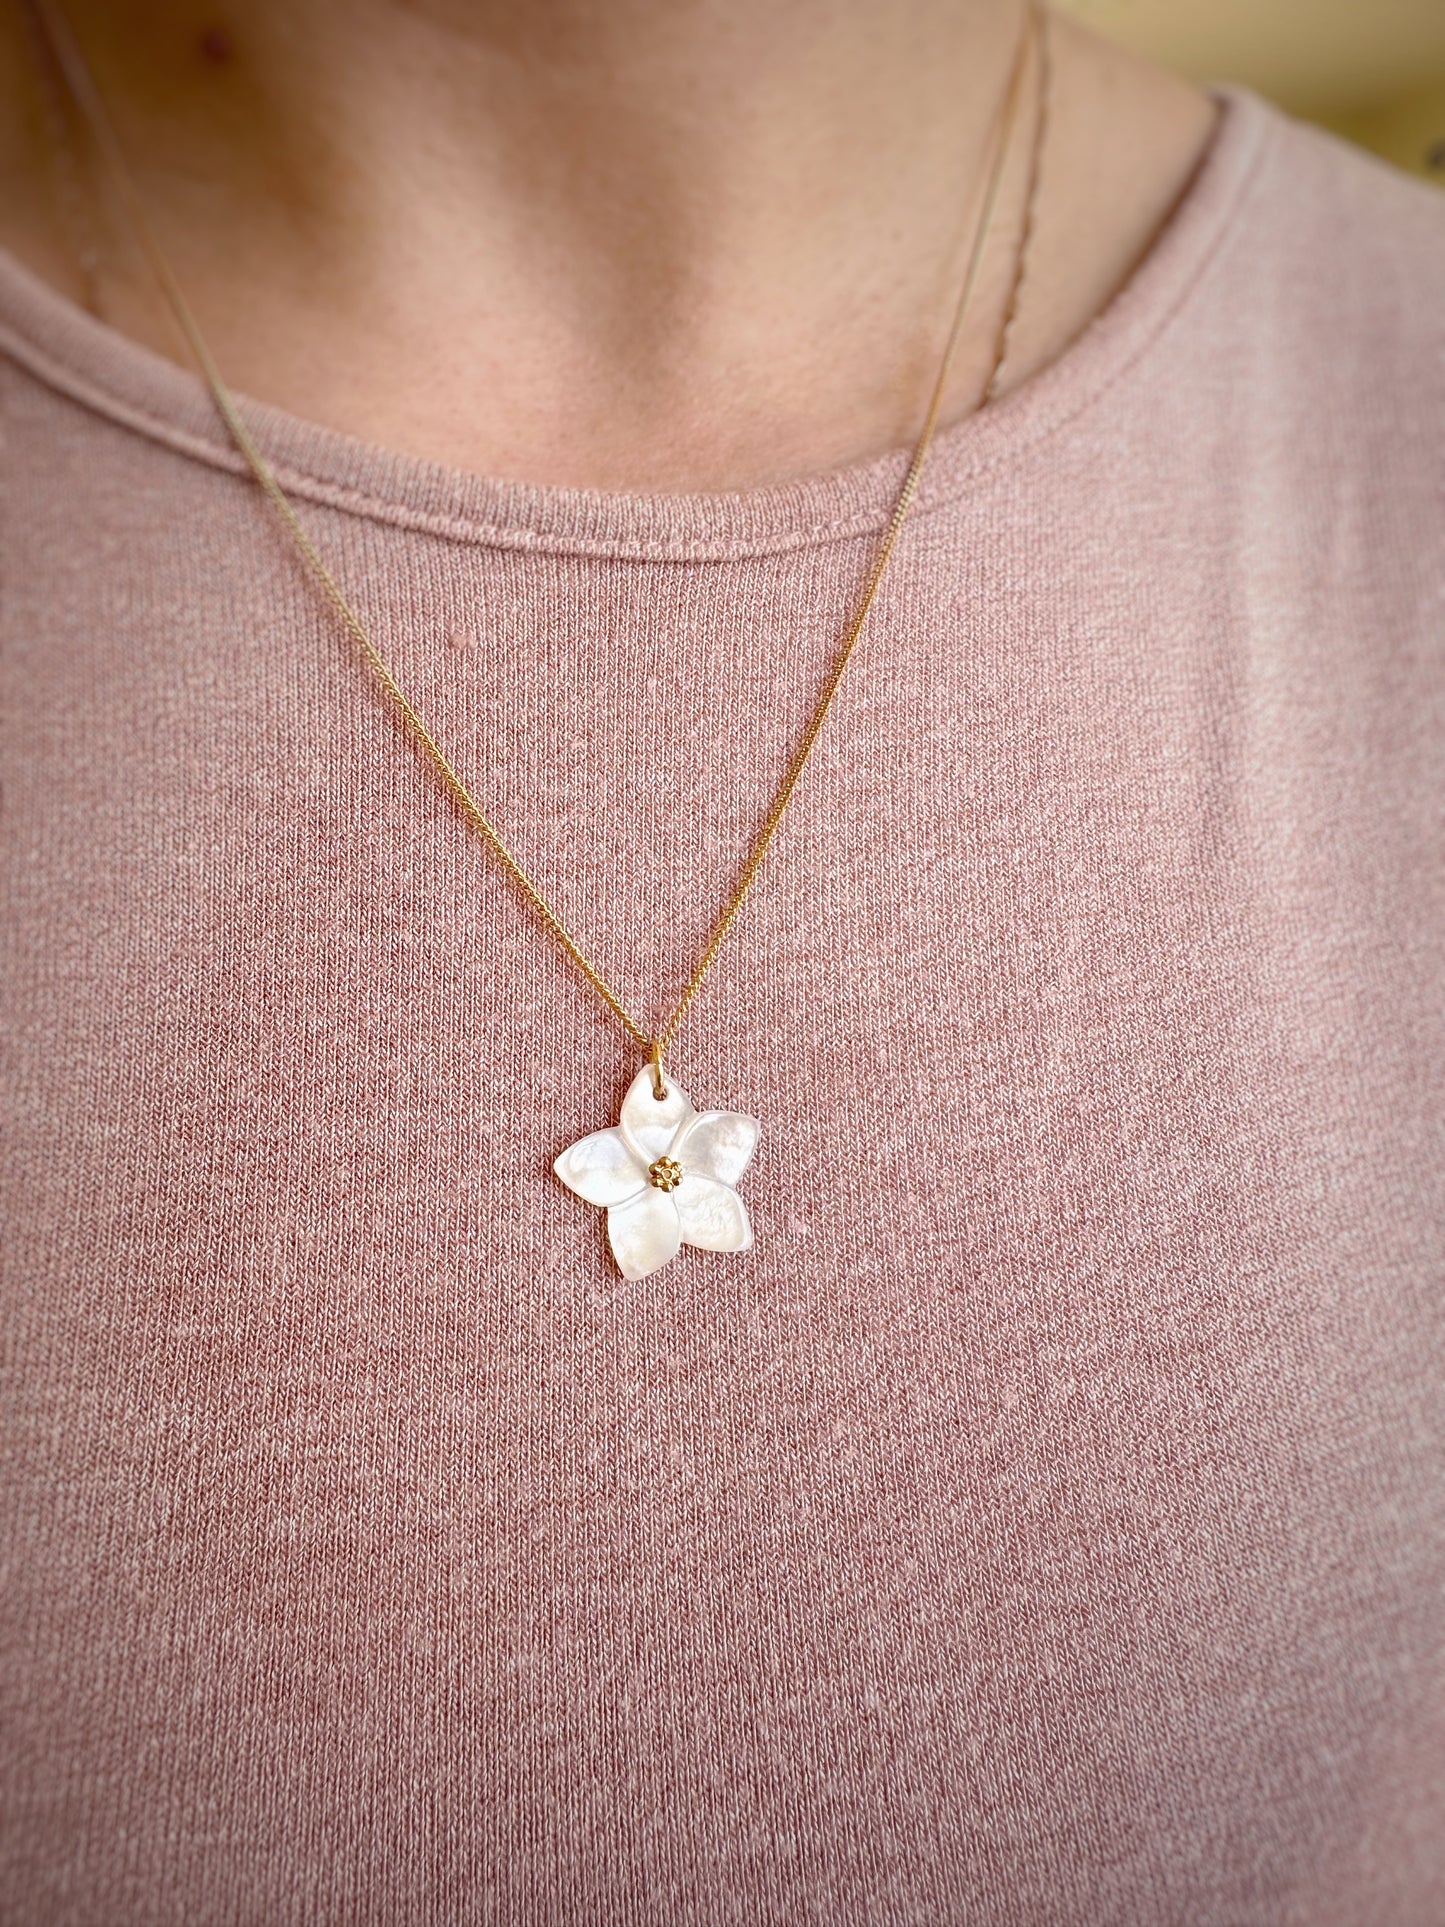 White Flower necklace